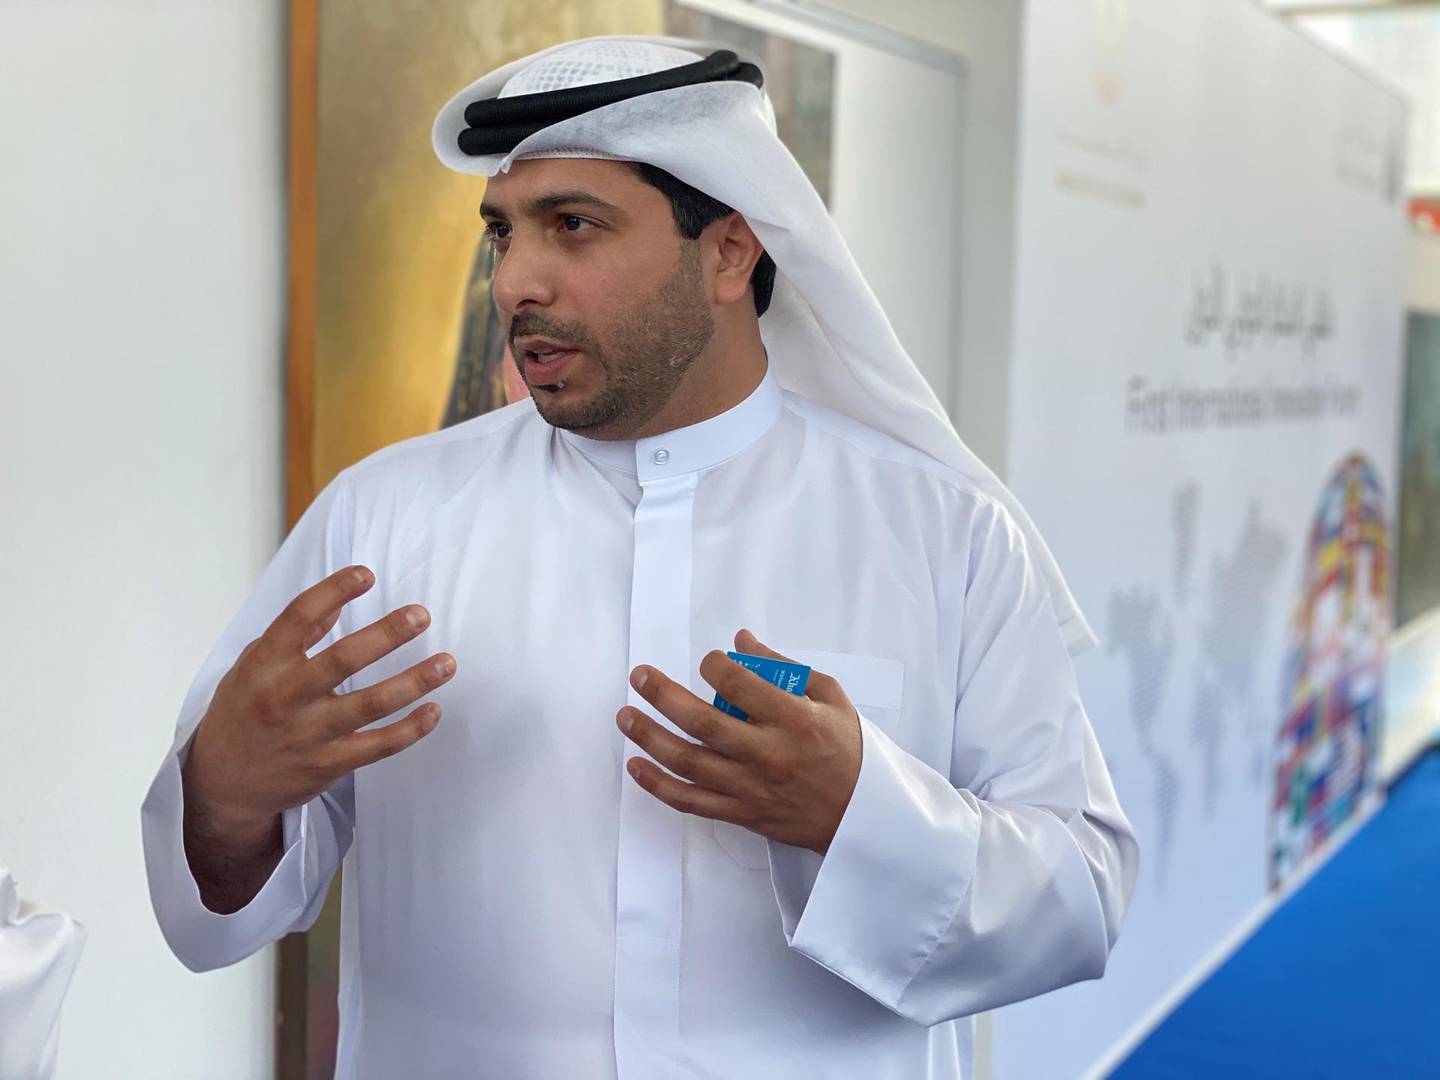 Abdullah Alshamsi, Assistant Undersecretary for Trade Remedies at the UAE Ministry of Economy and executive director of the team working to improve emirates ranking in the Global Innovation Index.